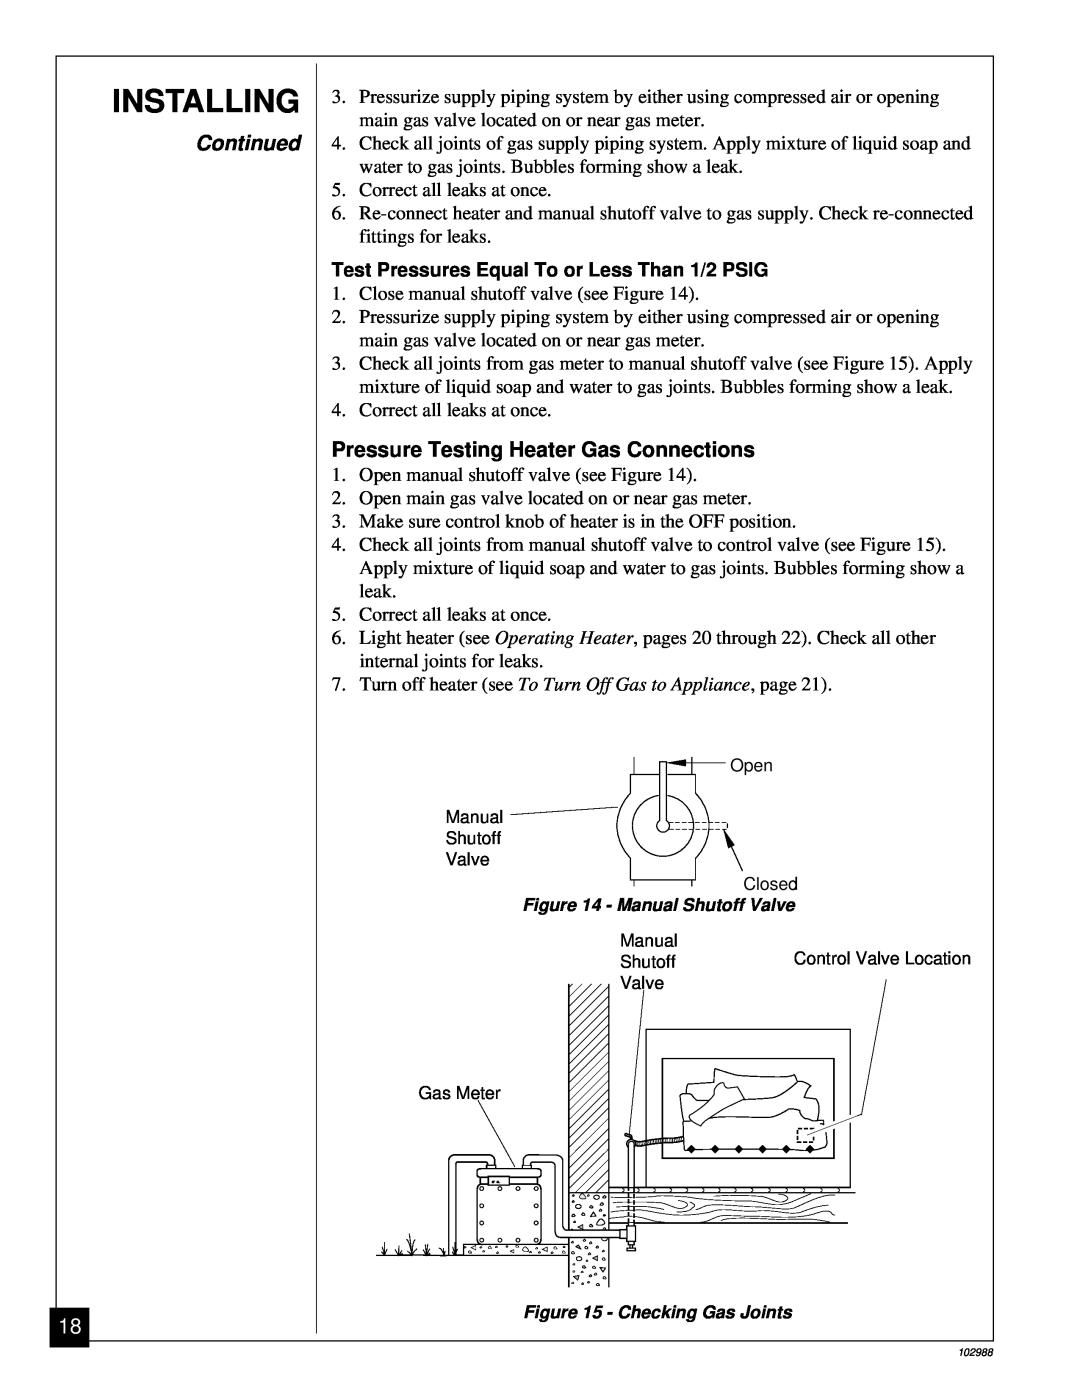 Desa CGS2718N installation manual Installing, Continued, Pressure Testing Heater Gas Connections 